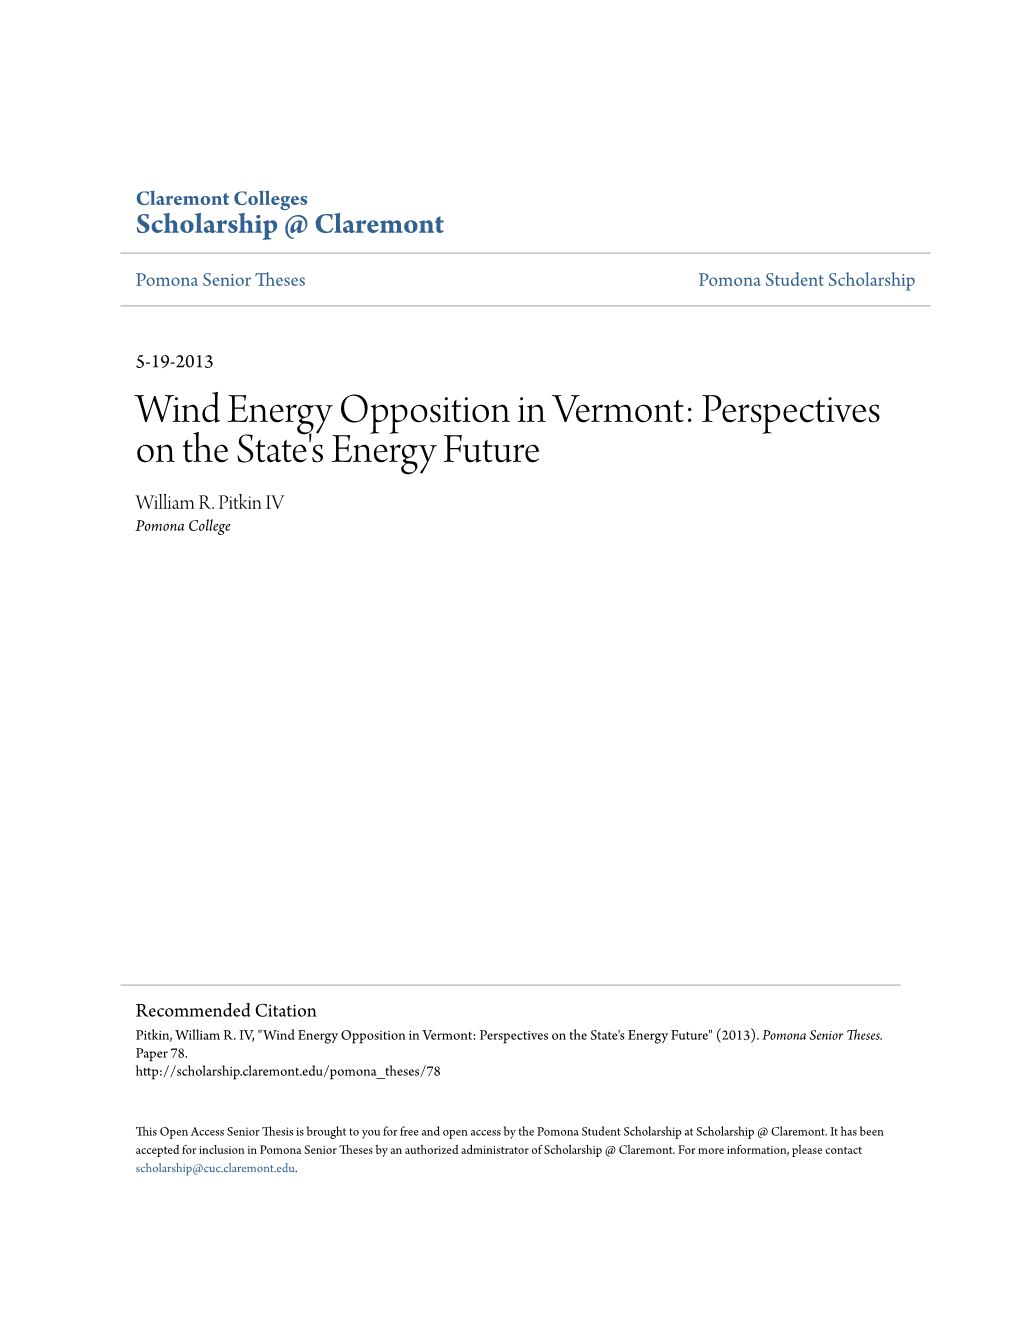 Wind Energy Opposition in Vermont: Perspectives on the State's Energy Future William R